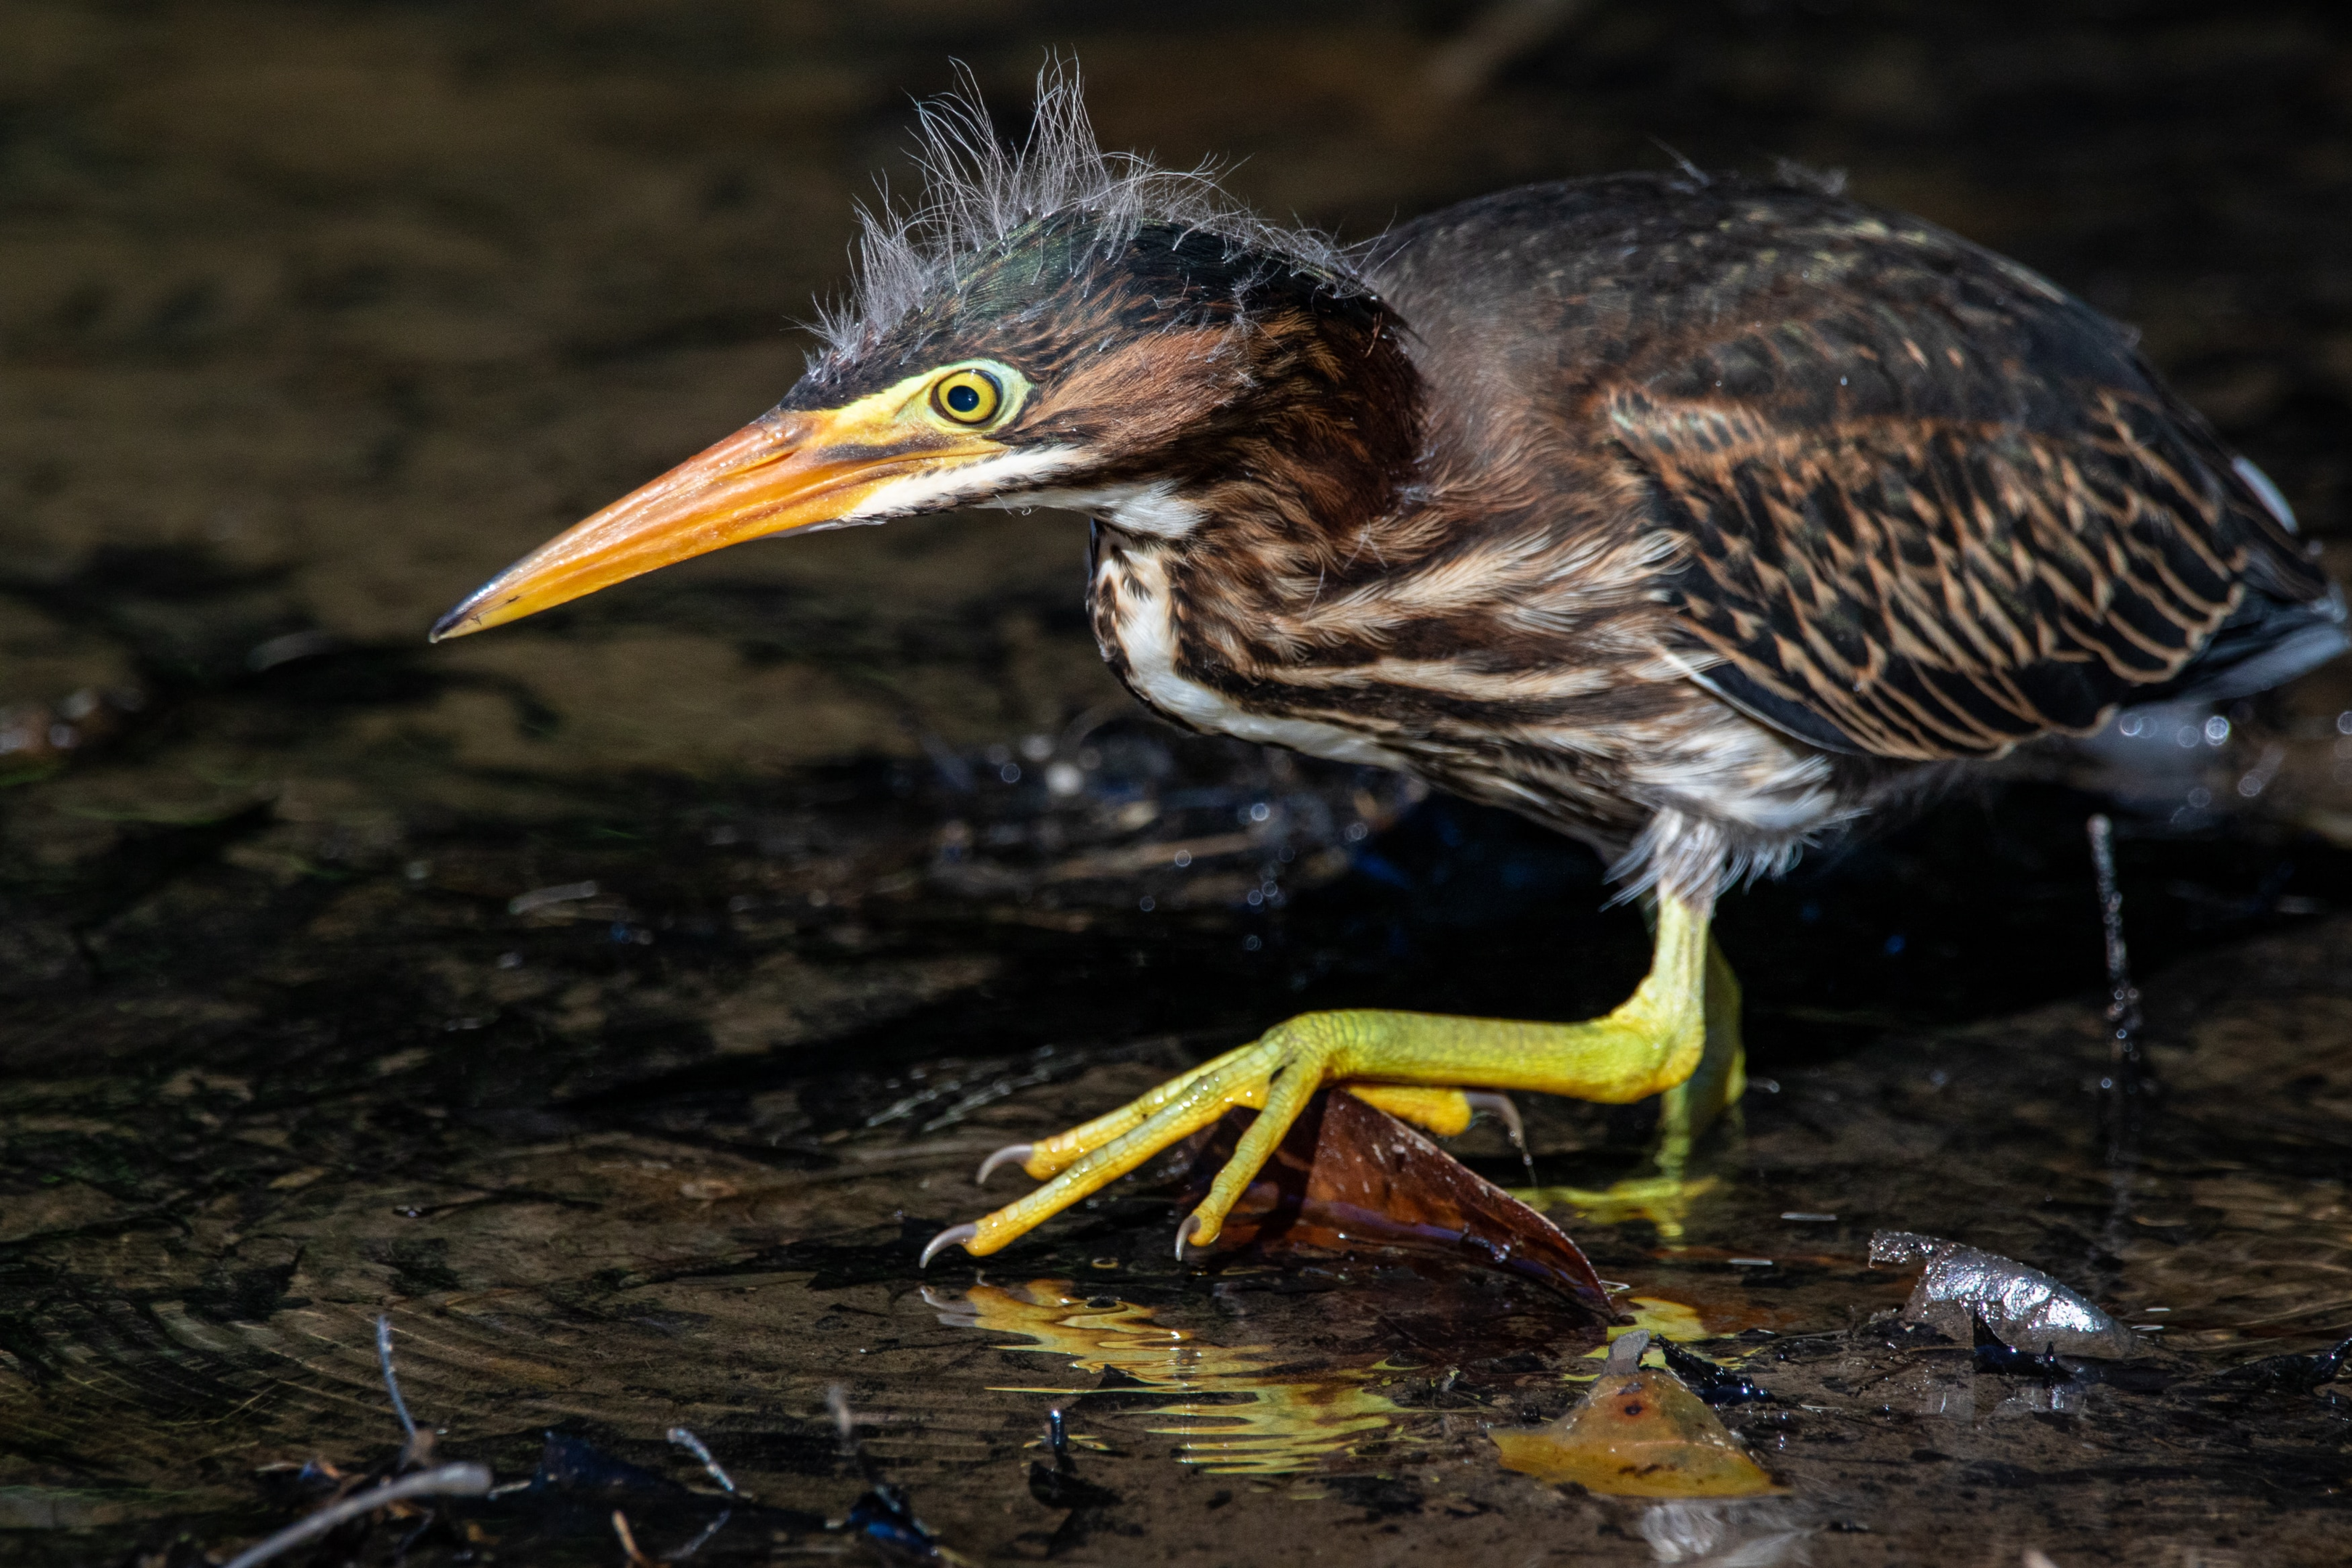 A green heron taking a cautious step over a leaf in shallow water